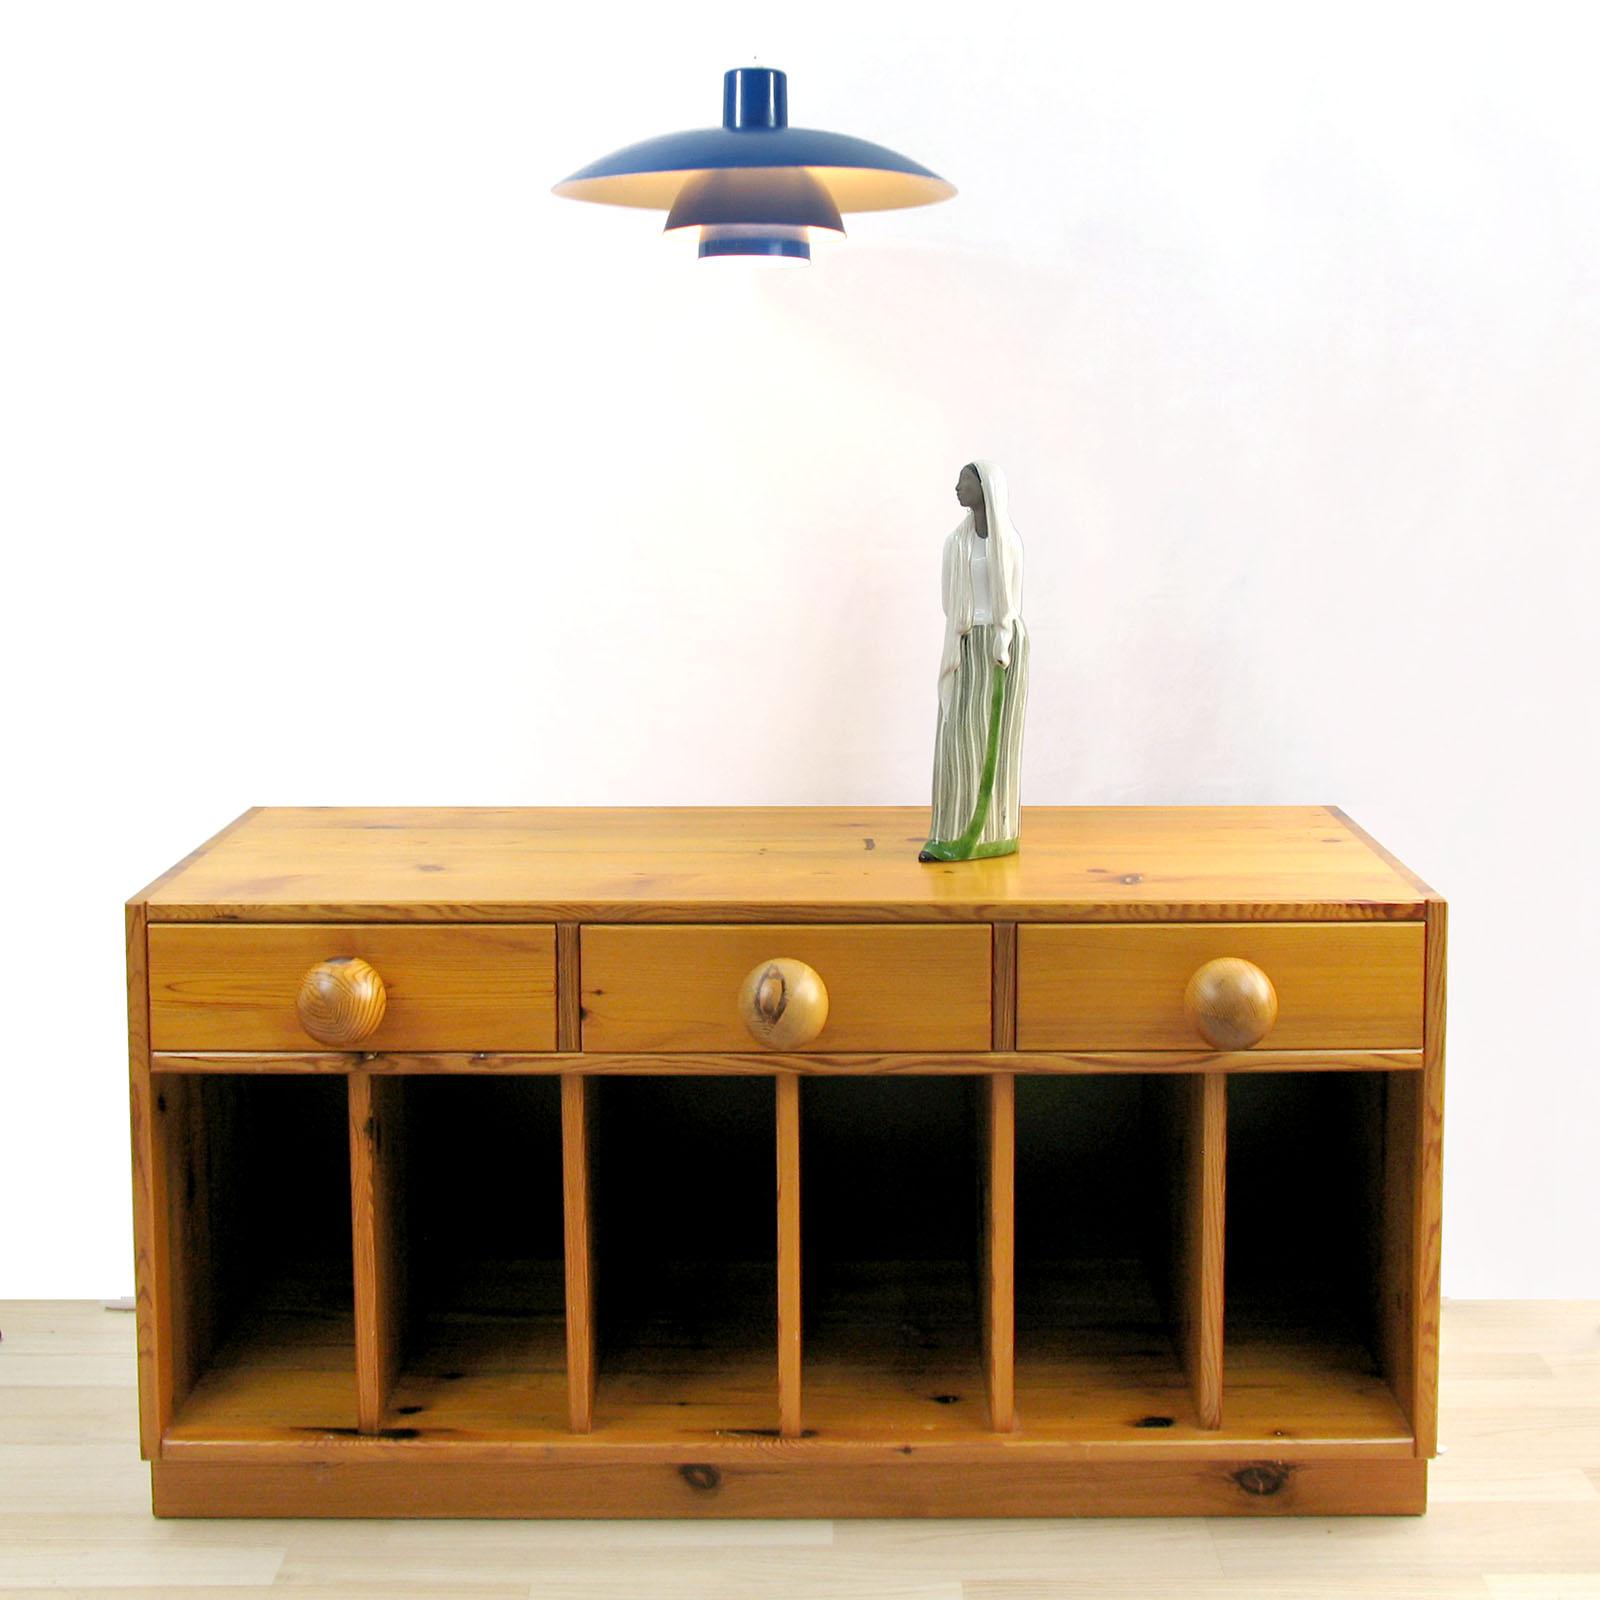 Rare bench with drawers or small sideboard in pine by Sven Larsson, Sweden, circa 1970.
This piece is a great example of the robust pine furniture era that grew popular in Sweden in the late 1960s. The sideboard is made of thick solid pine with